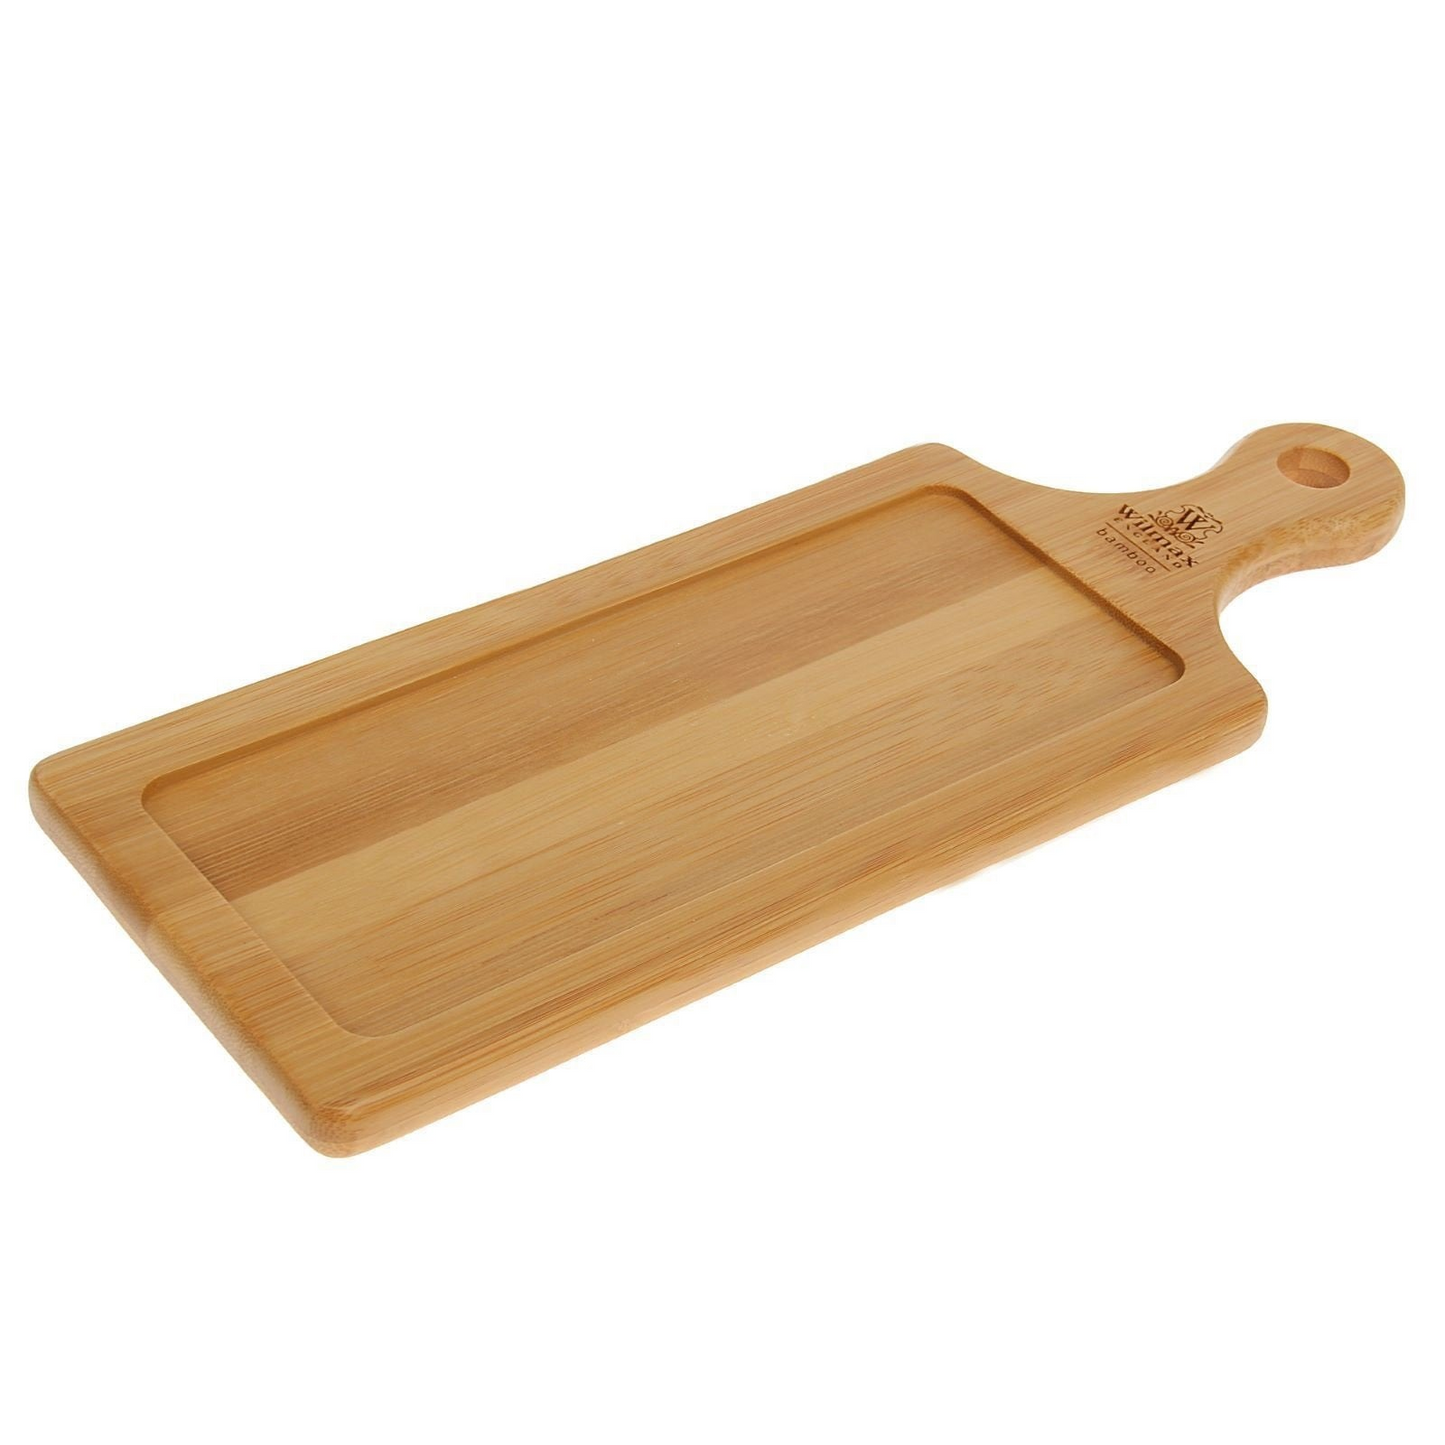 Wilmax [A] Natural Bamboo Tray 11.75" X 4.5" | 30 X 11 Cm WL-771005/A